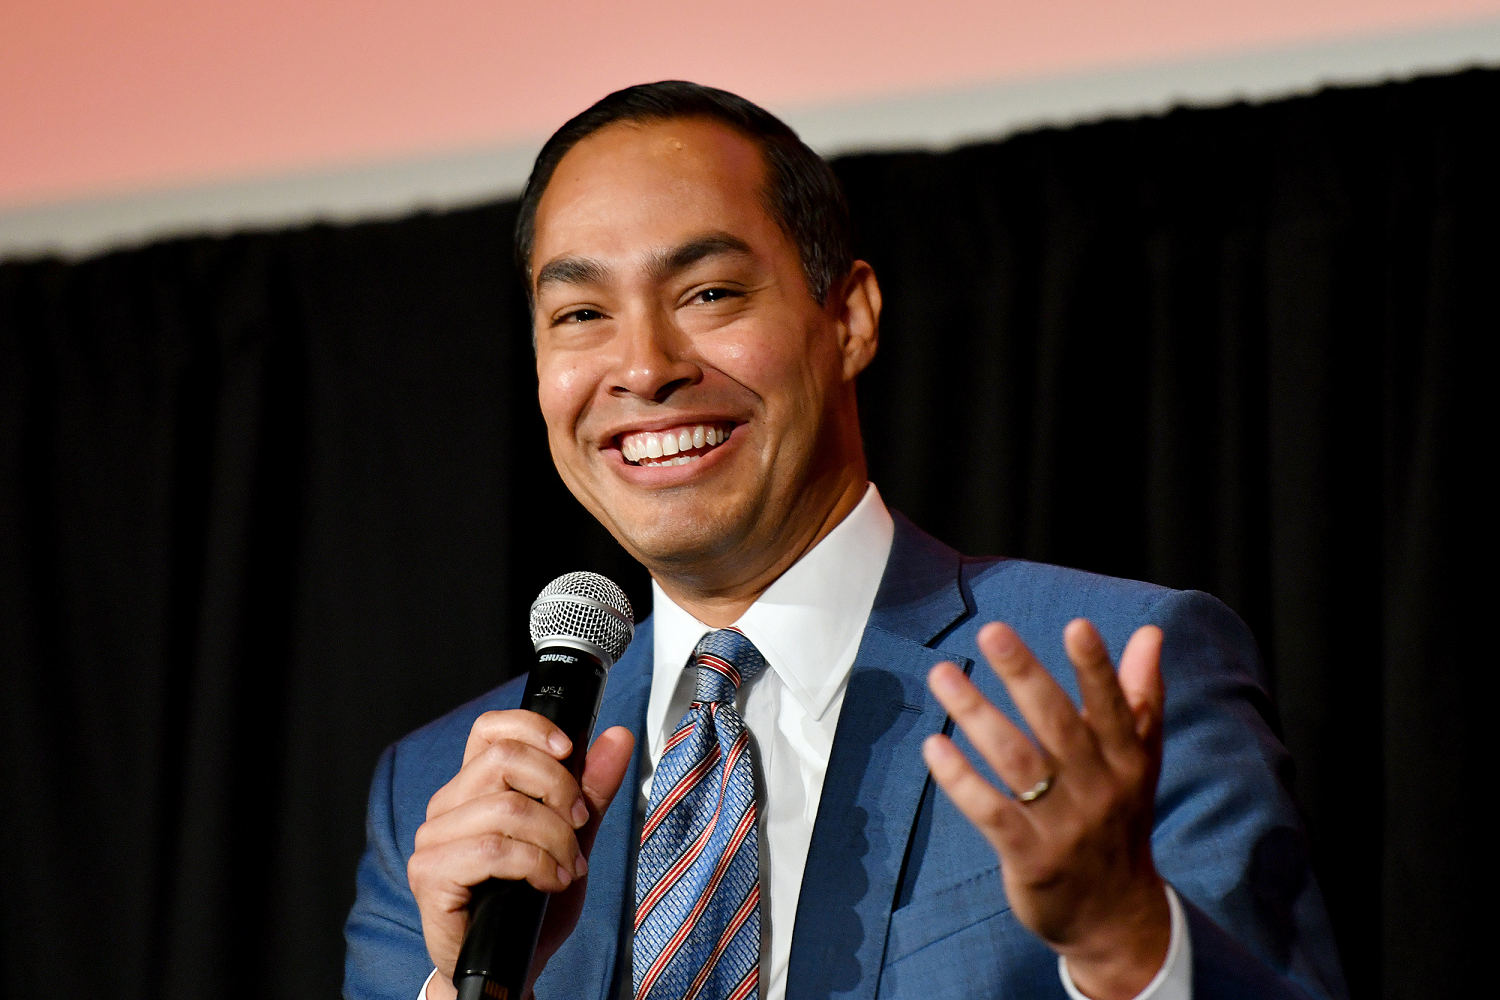 Julián Castro's new mission: Helping Latinos help themselves